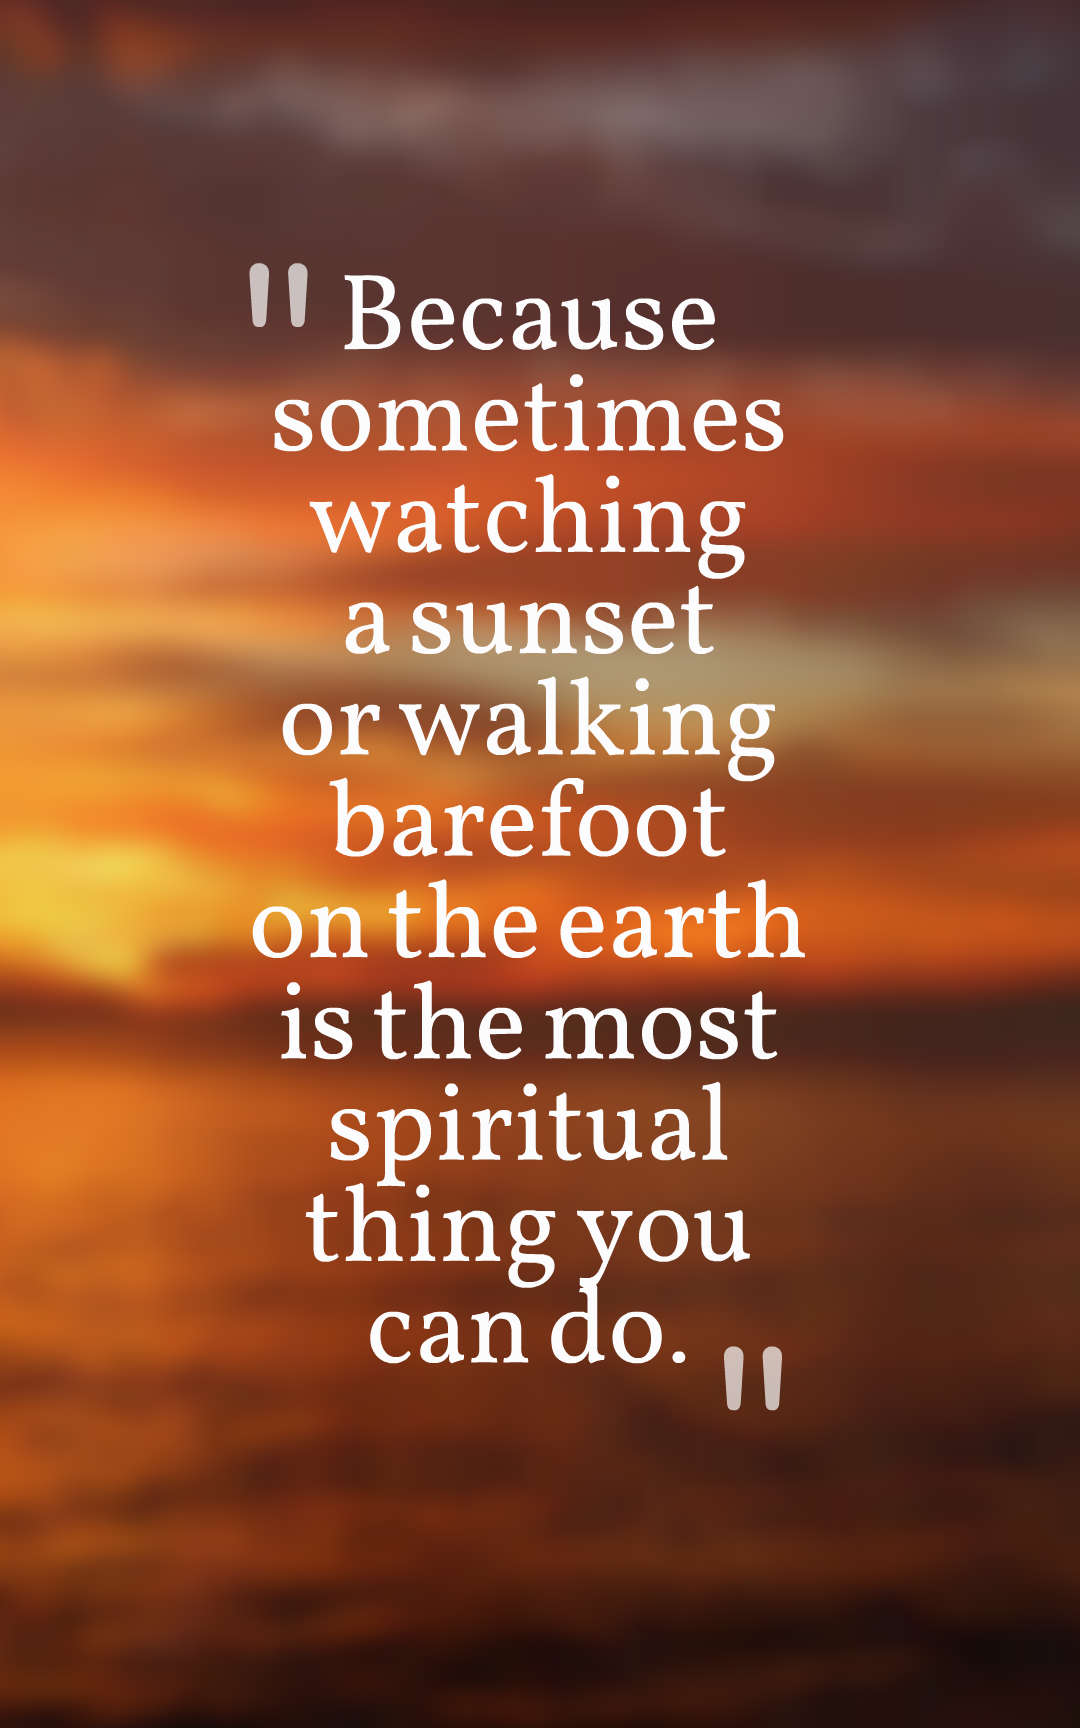 Because sometimes watching a sunset or walking barefoot on the earth is the most spiritual thing you can do.